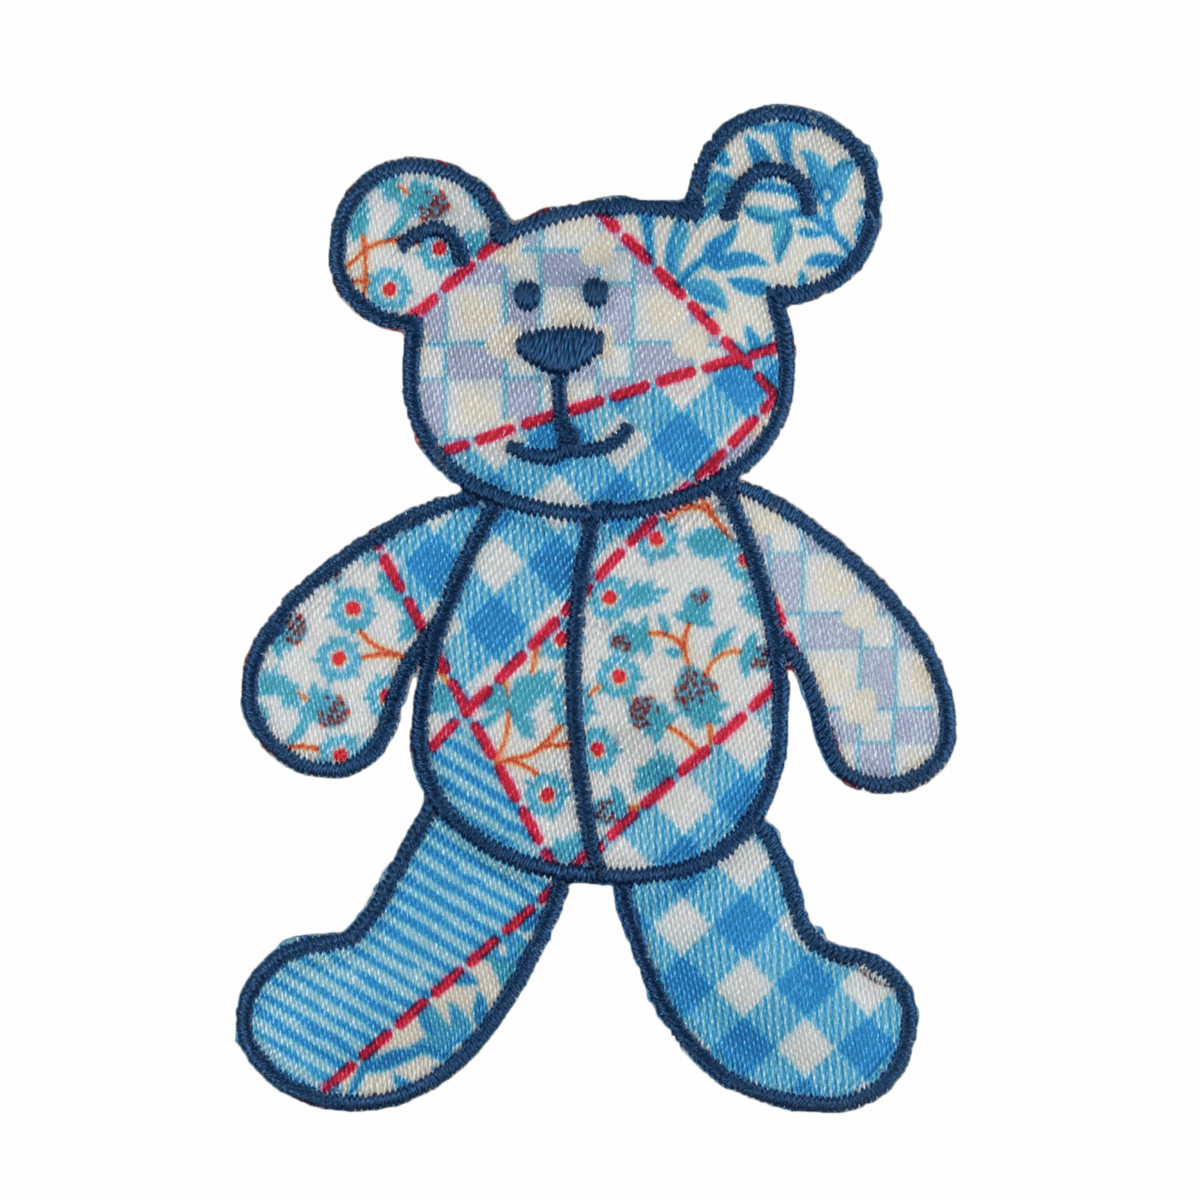 Iron-On/Sew On Motif Patch - Blue Patchwork Bear